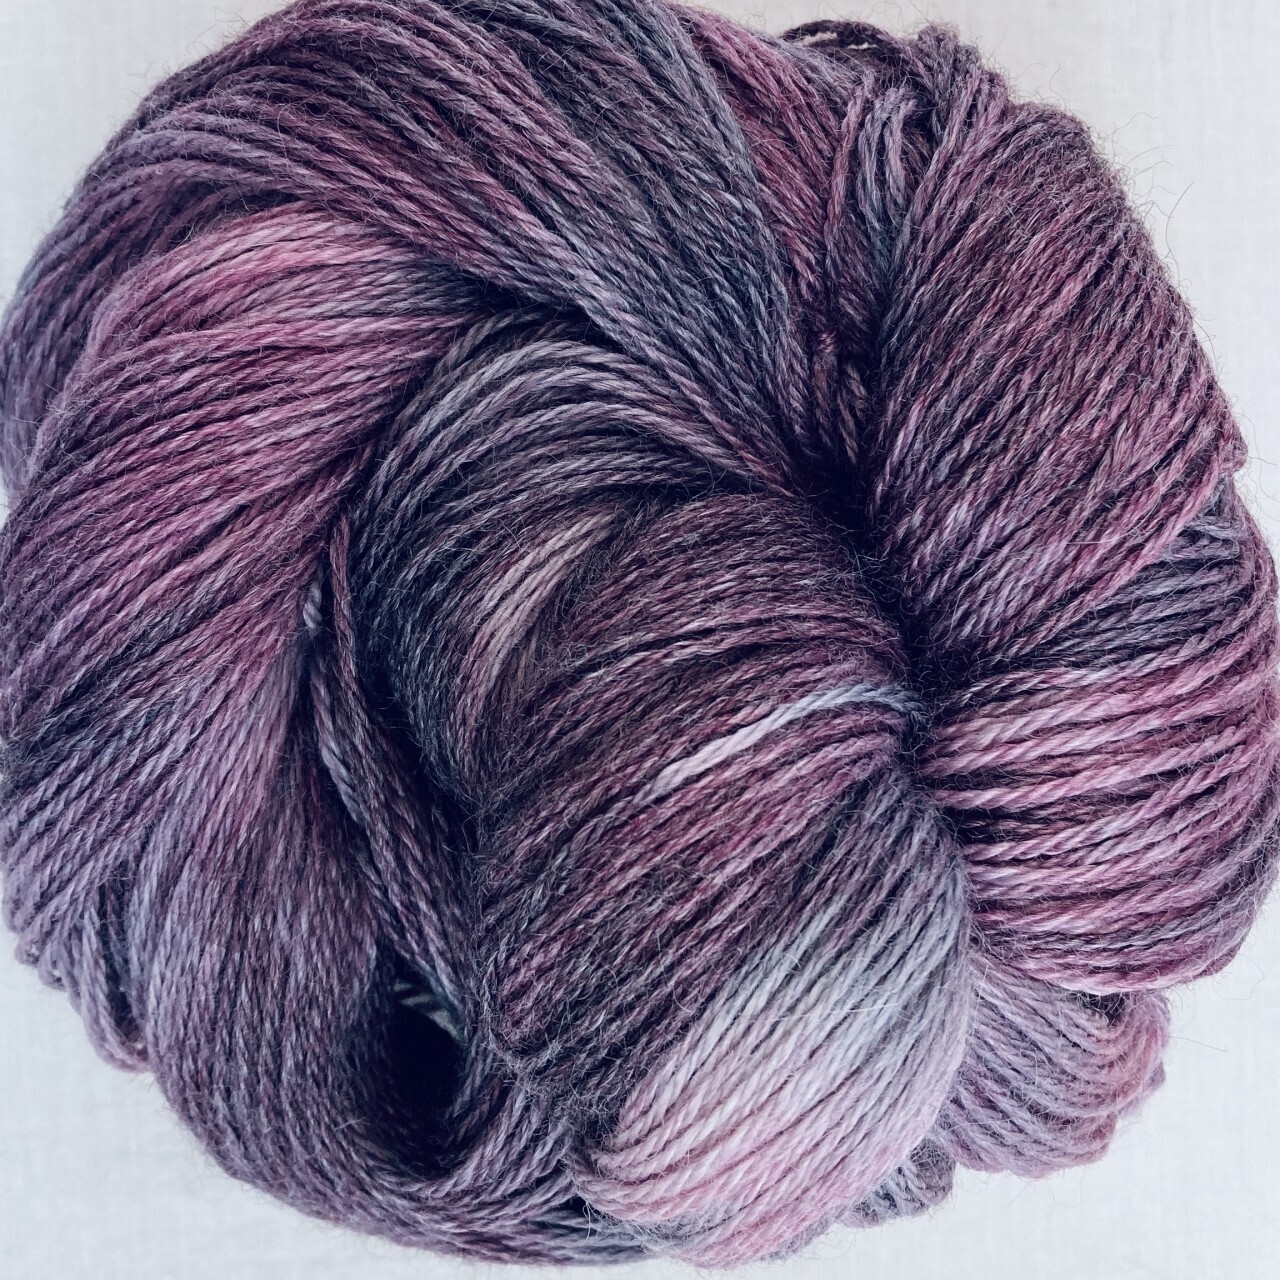 Mariquita Hand Dyed - Artic Berry